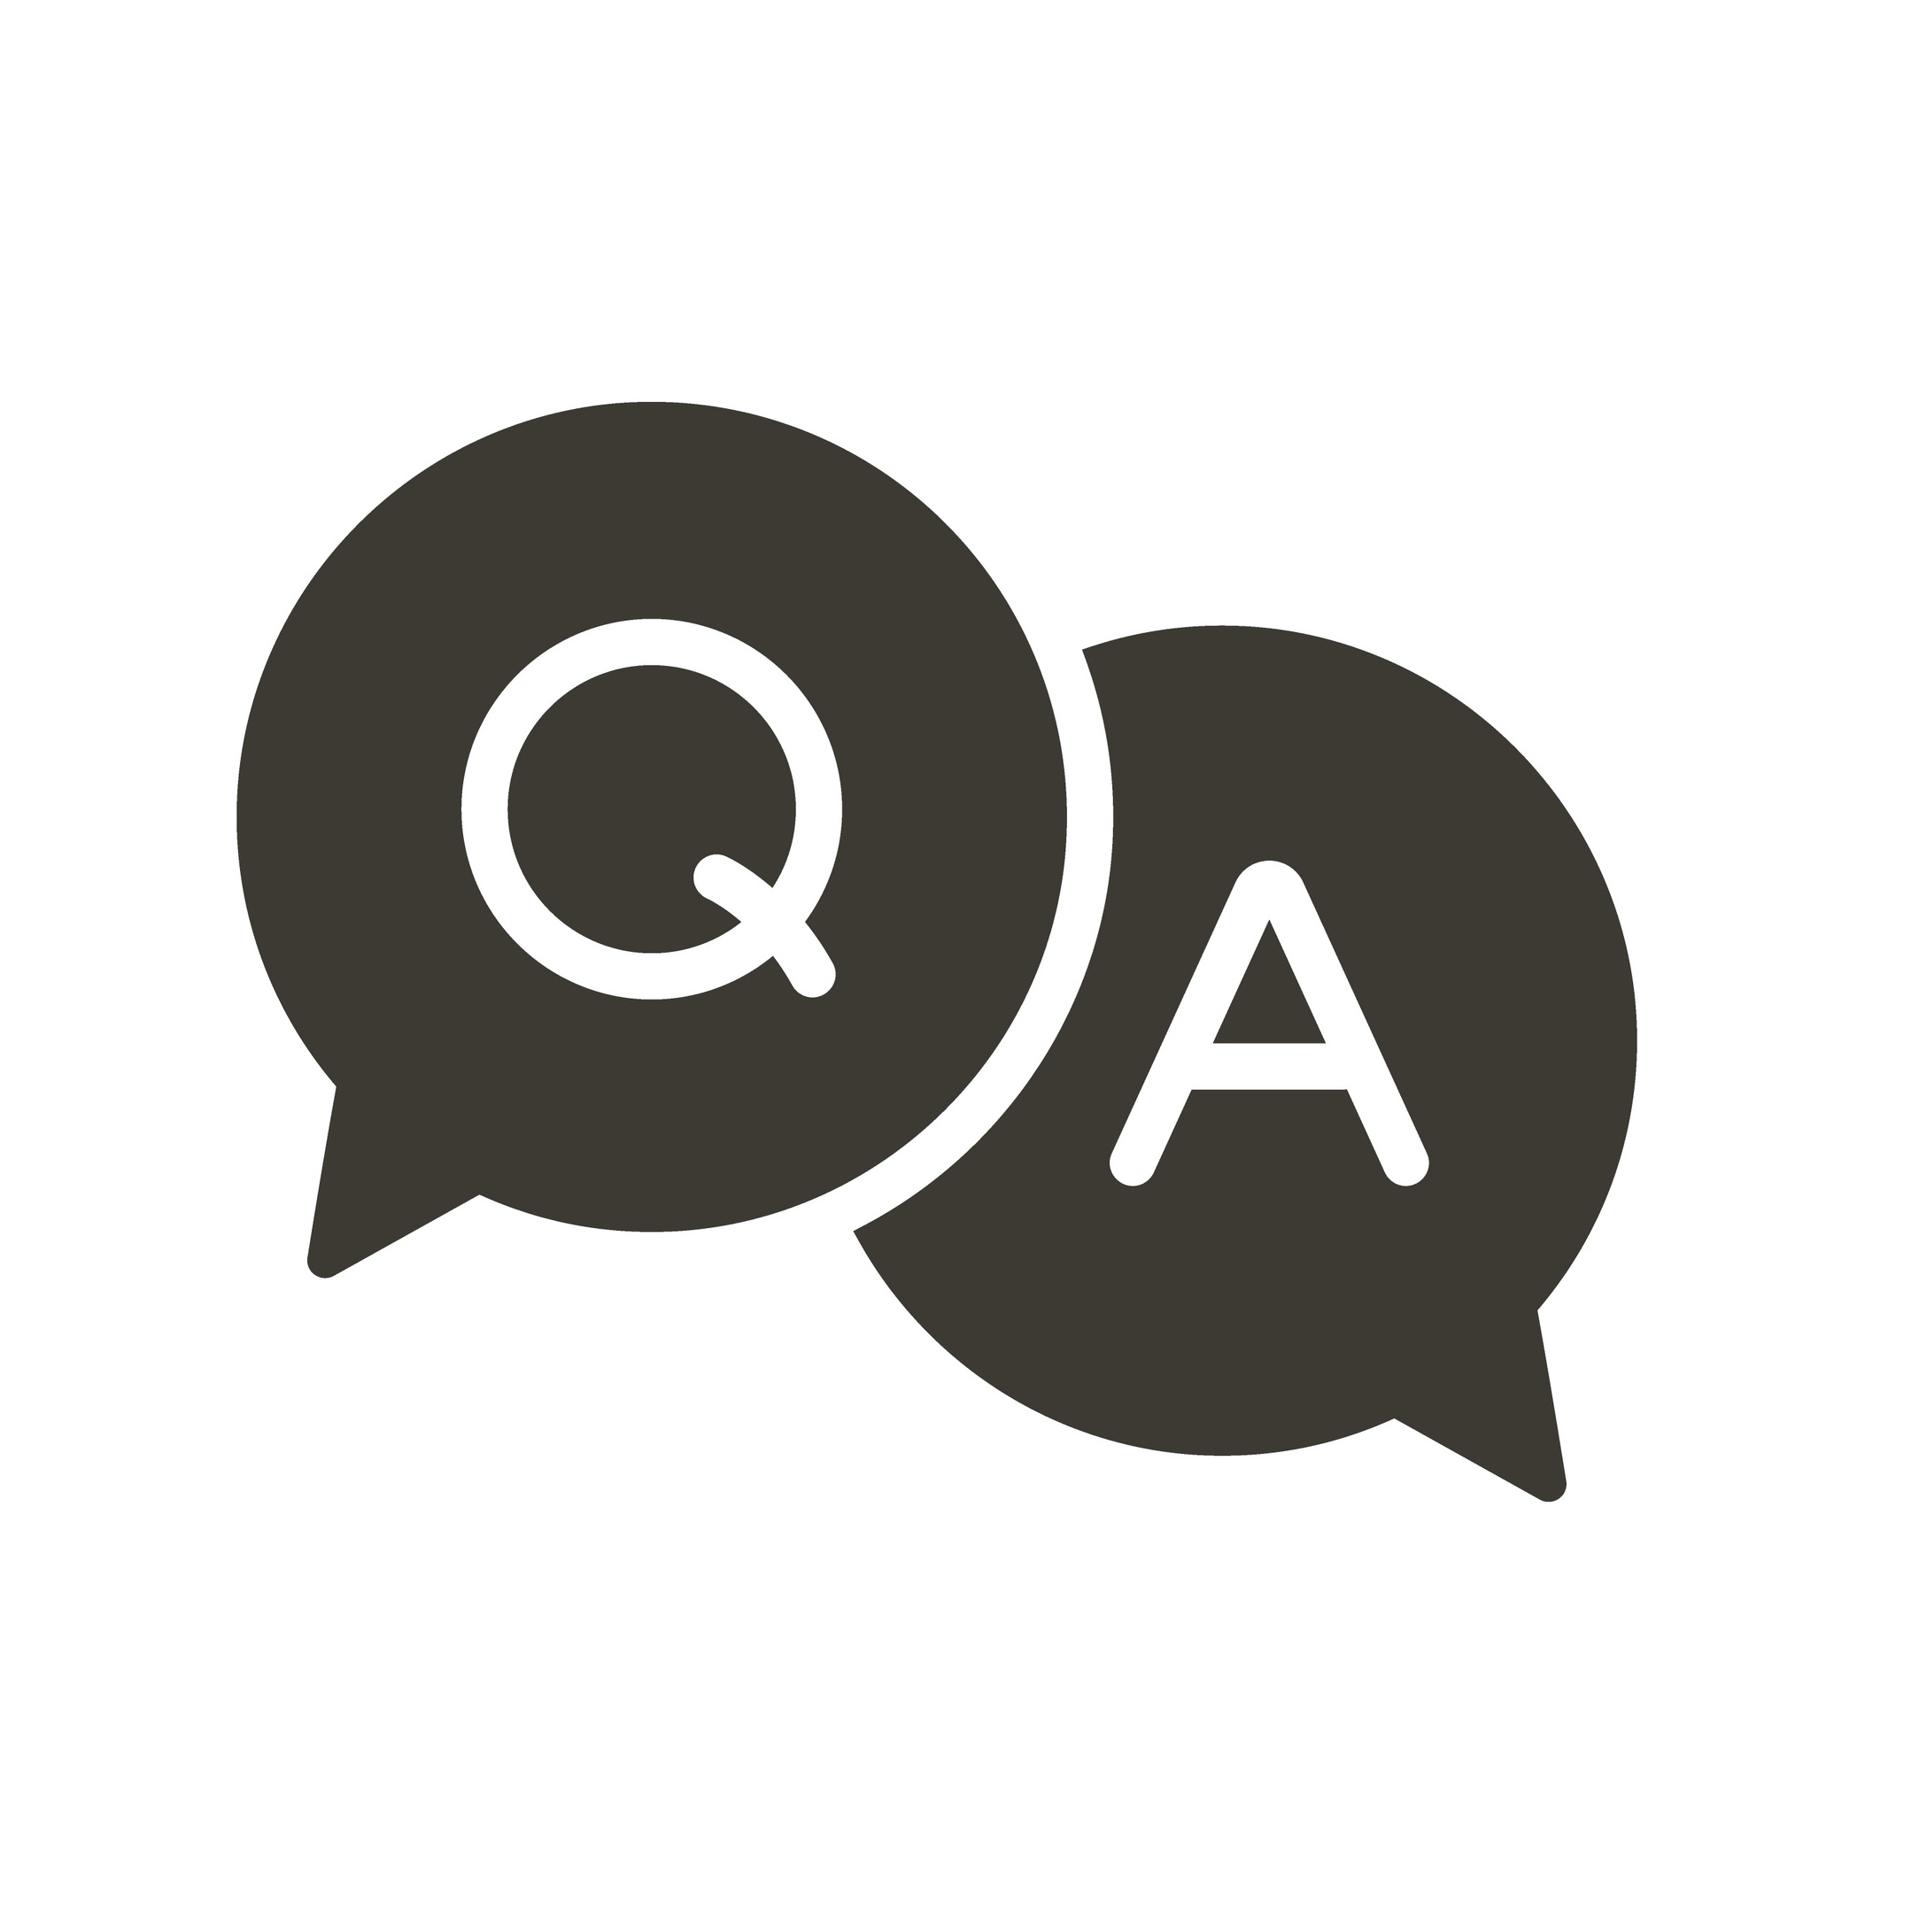 Questions and answers icon with speech bubble and q and a letters. Vector minimal trendy  illustration in 3 styles for frequently asked questions concepts in websites